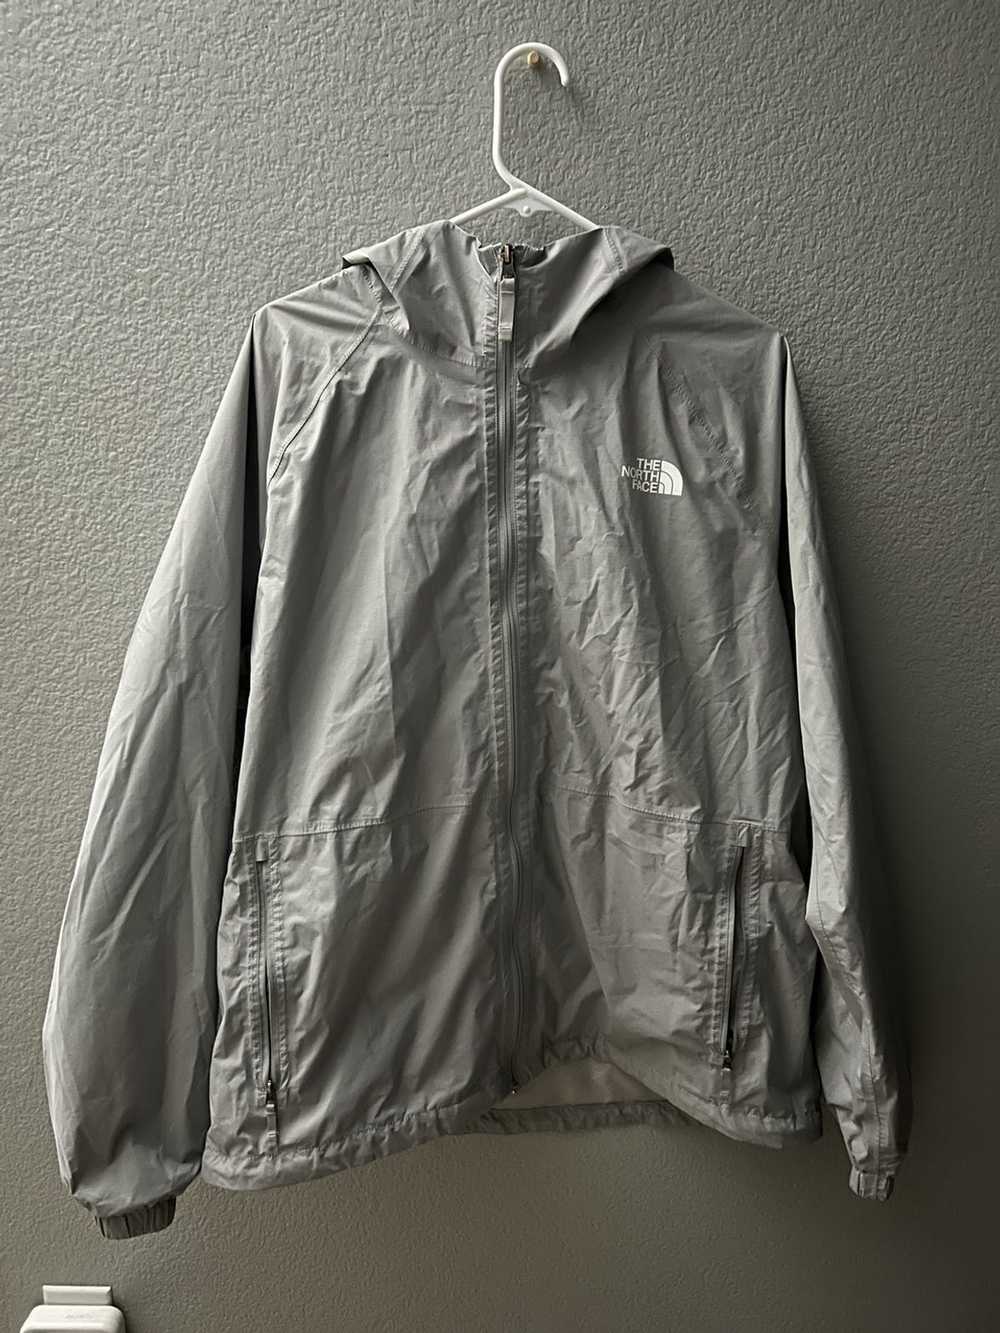 The North Face North Face windbreaker - image 1